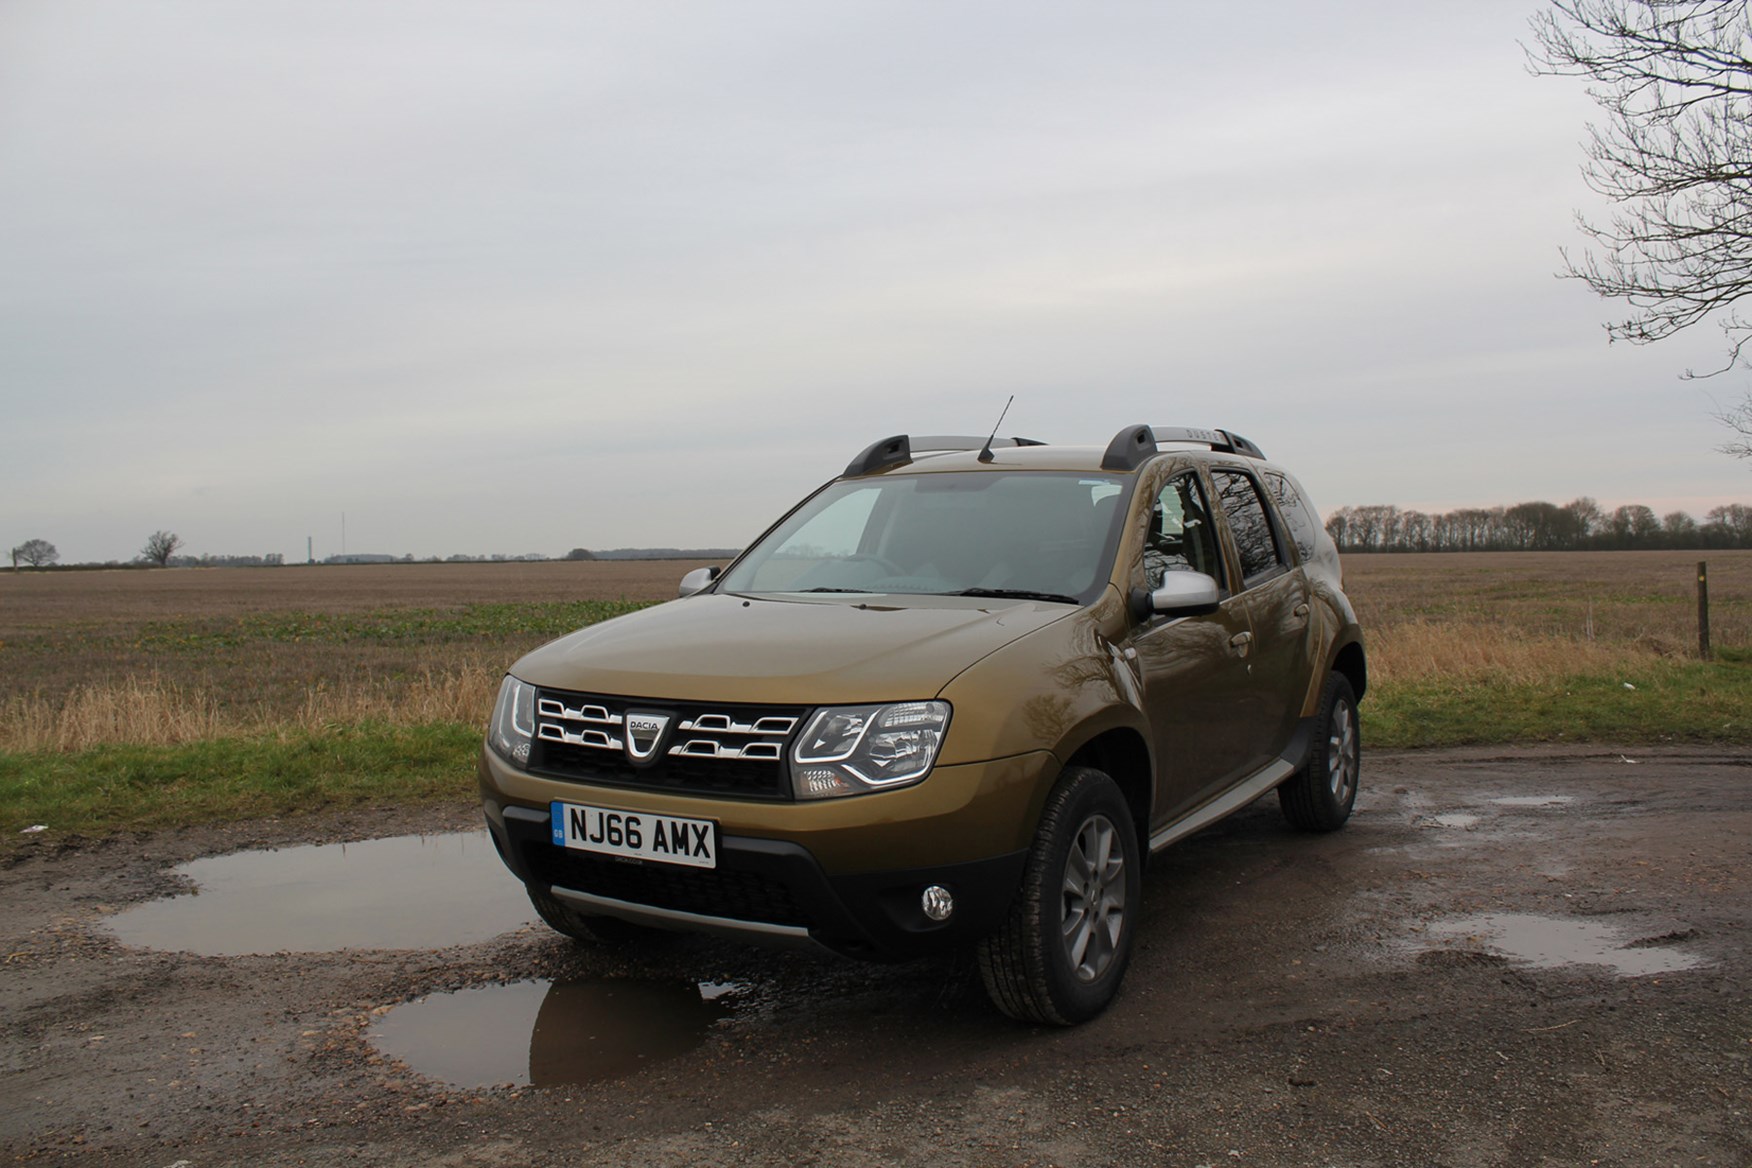 Dacia Duster full review on Parkers Vans - front